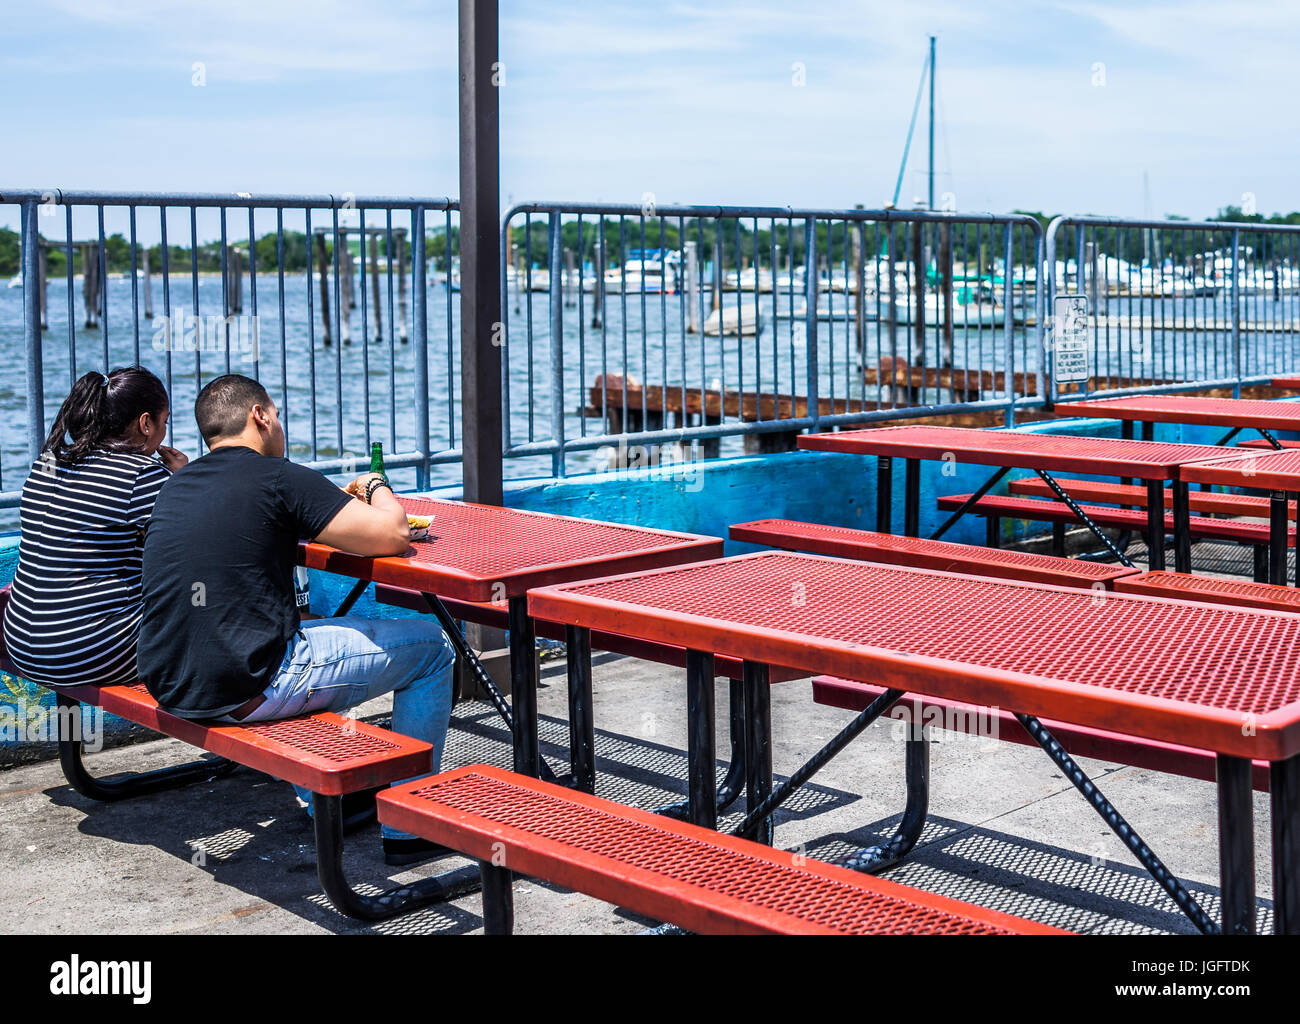 Bronx, USA - June 11, 2017: City Island harbor with boats and people eating lunch on picnic tables by restaurant Stock Photo